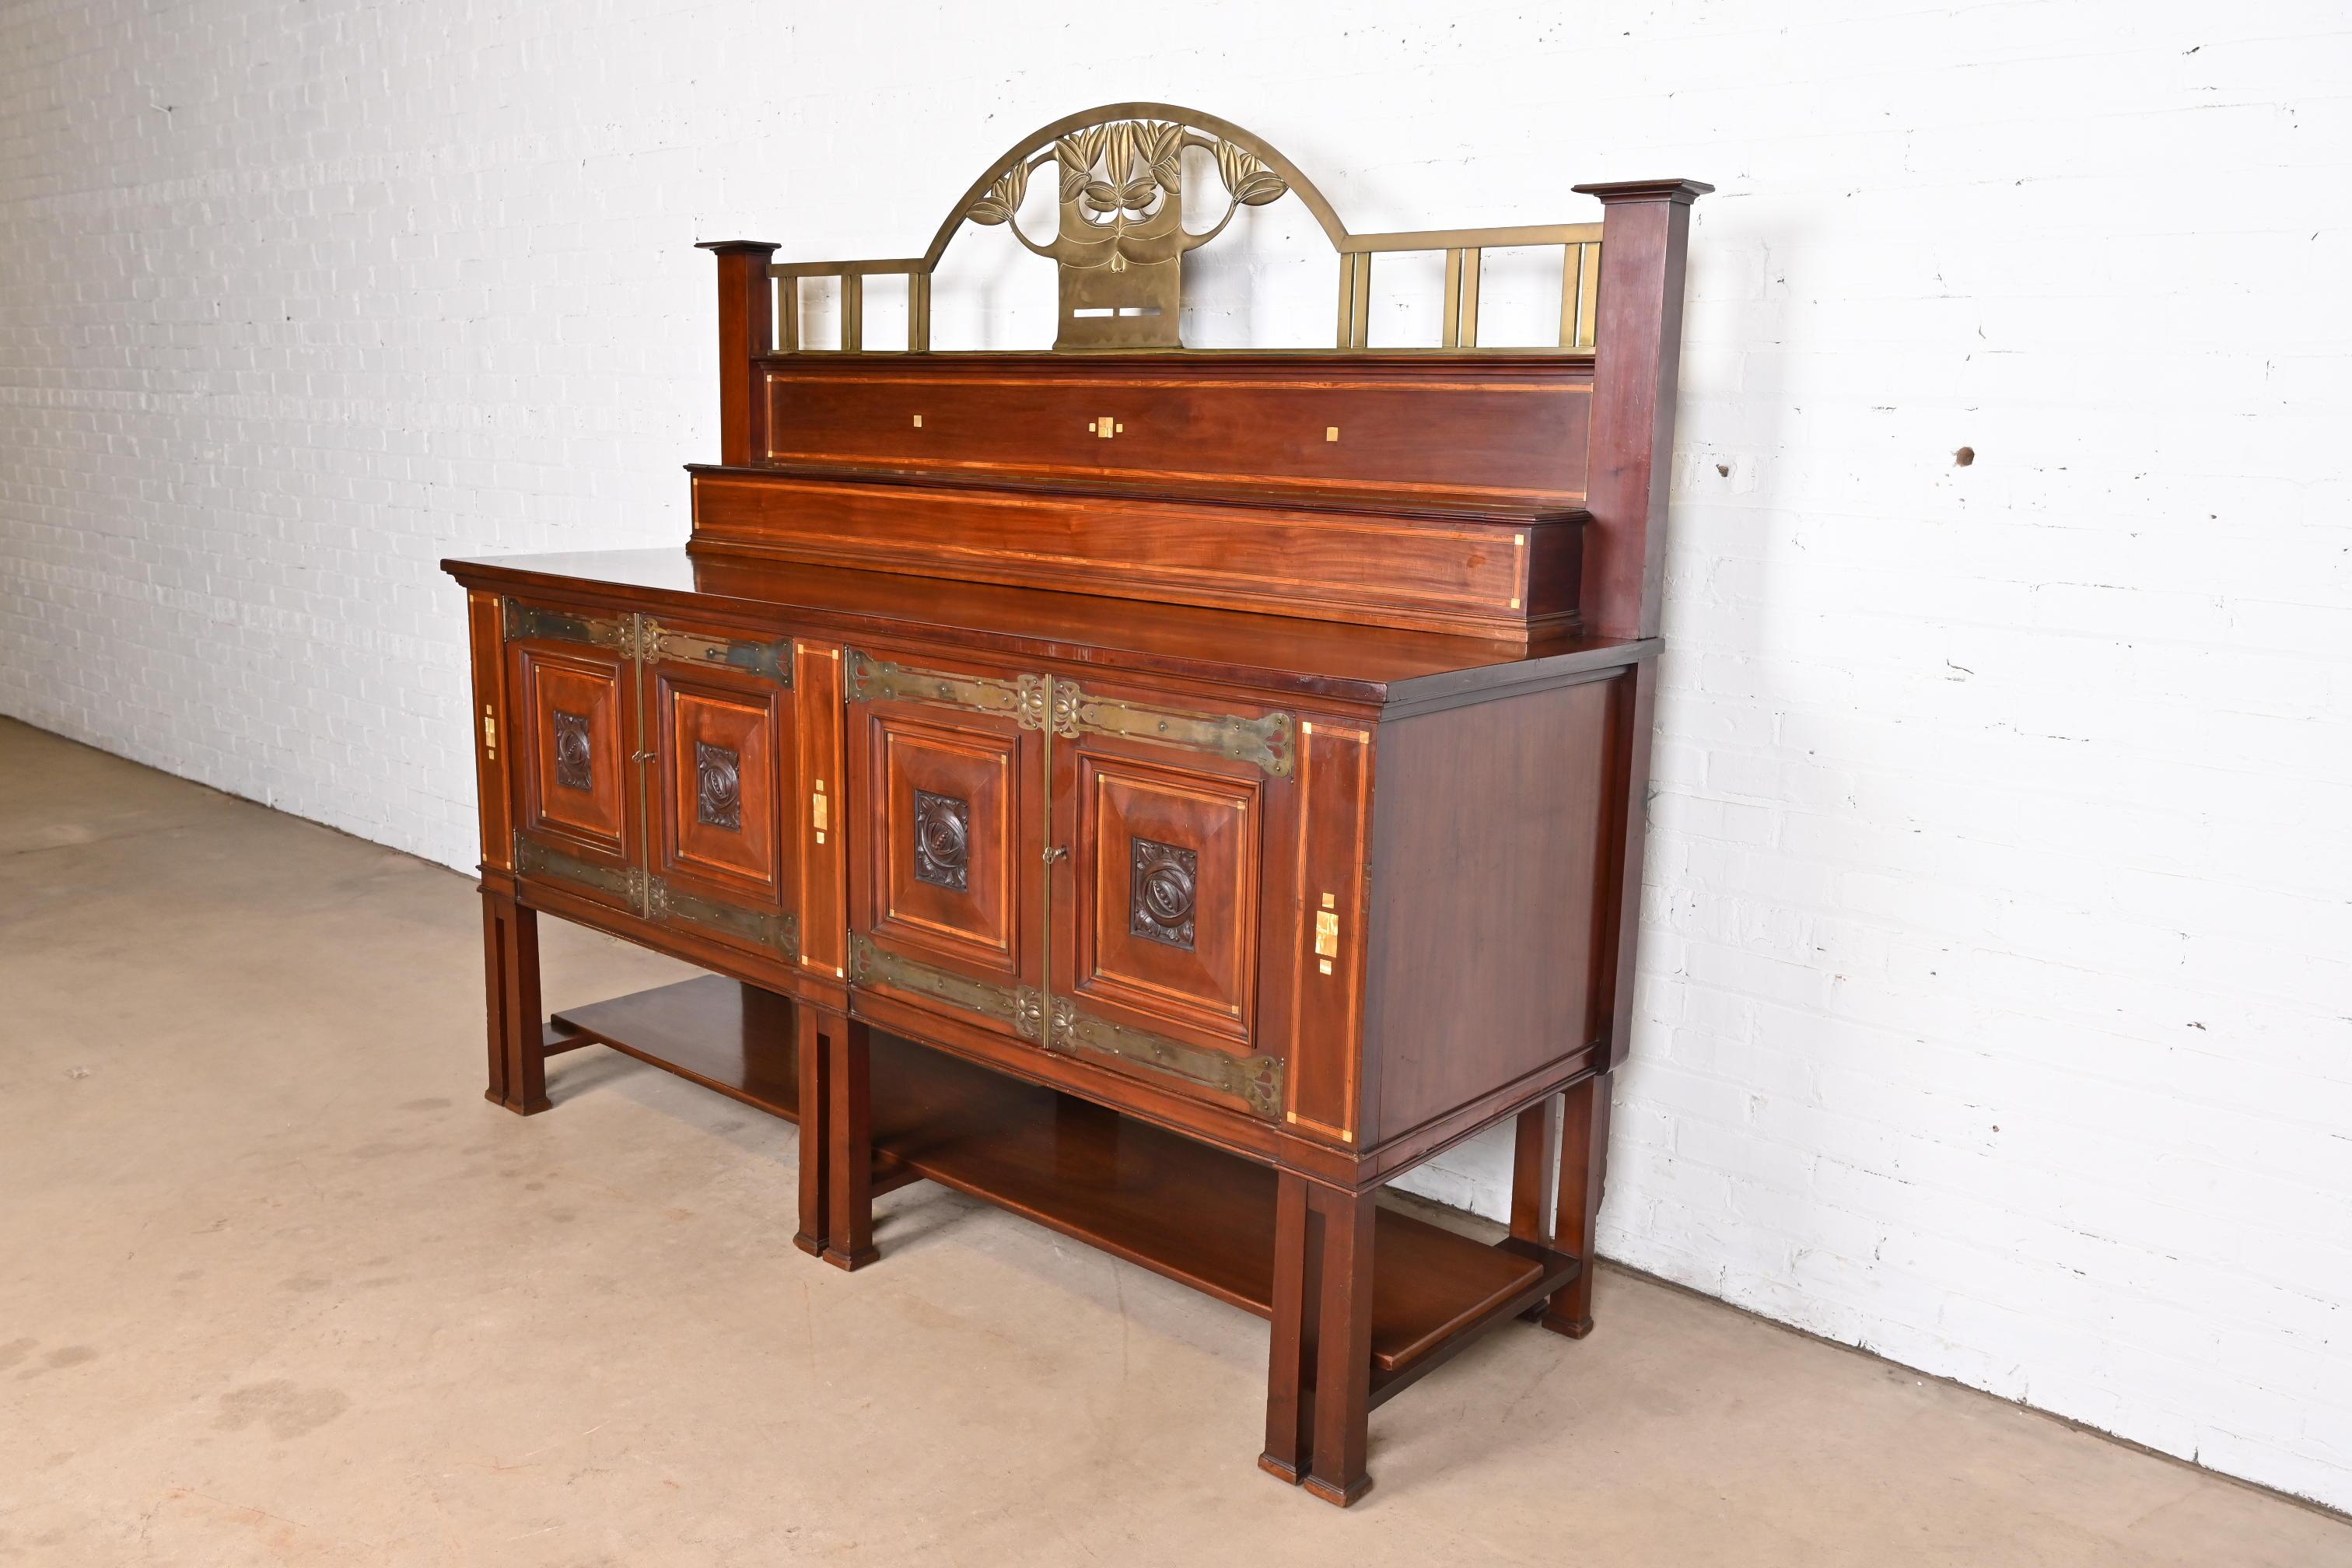 Art Deco Antique English Arts & Crafts Inlaid Mahogany Sideboard by Robson & Sons For Sale